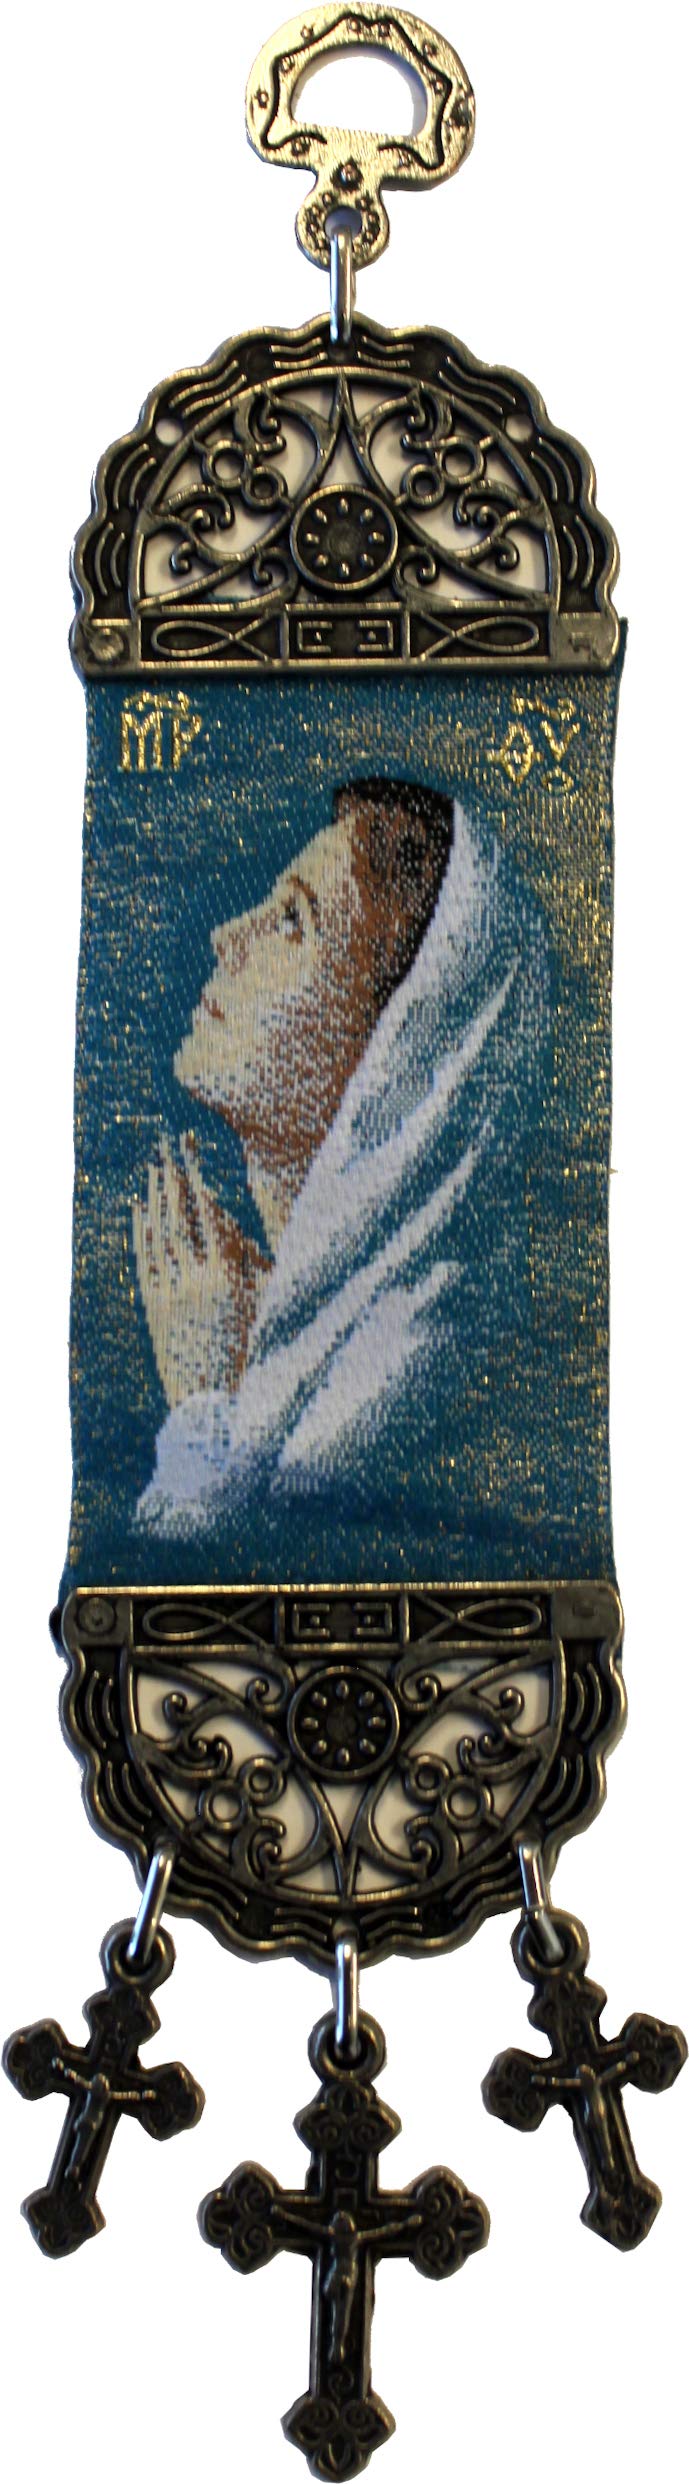 Holy Land Market Wall Hanging Tapestry of The Blessed Mother Mary - with Heat Printing on Synthetic Cloth Decorated - Style III (8.85 x 2 Inches)